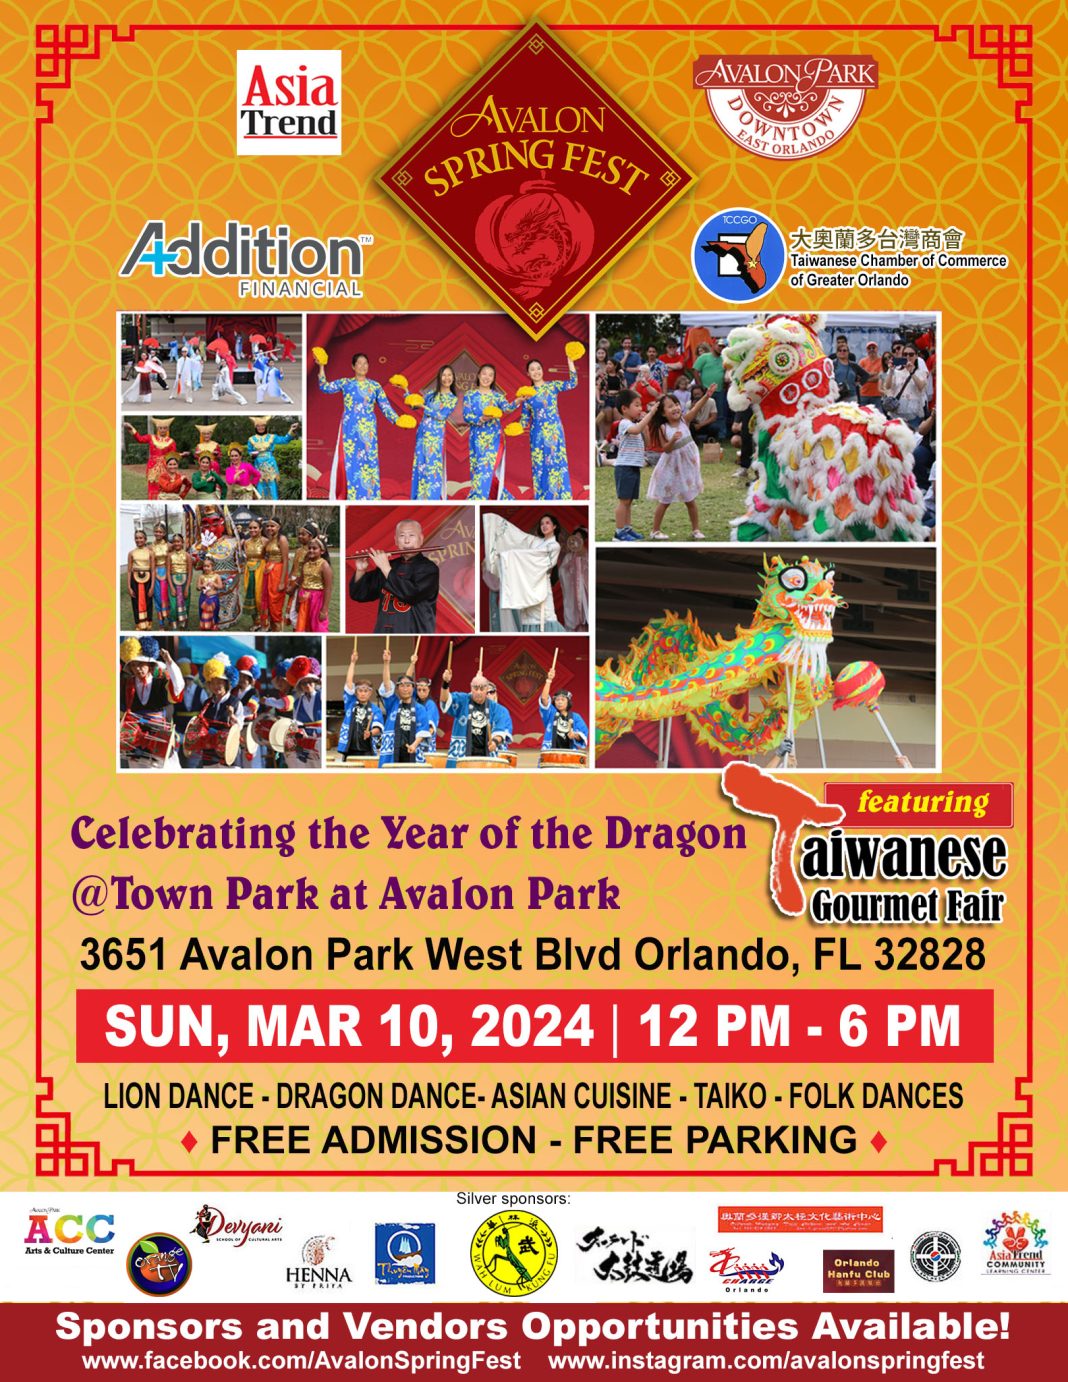 2nd Annual Avalon SpringFest 2024 Lunar New Year Festival Asia Trend